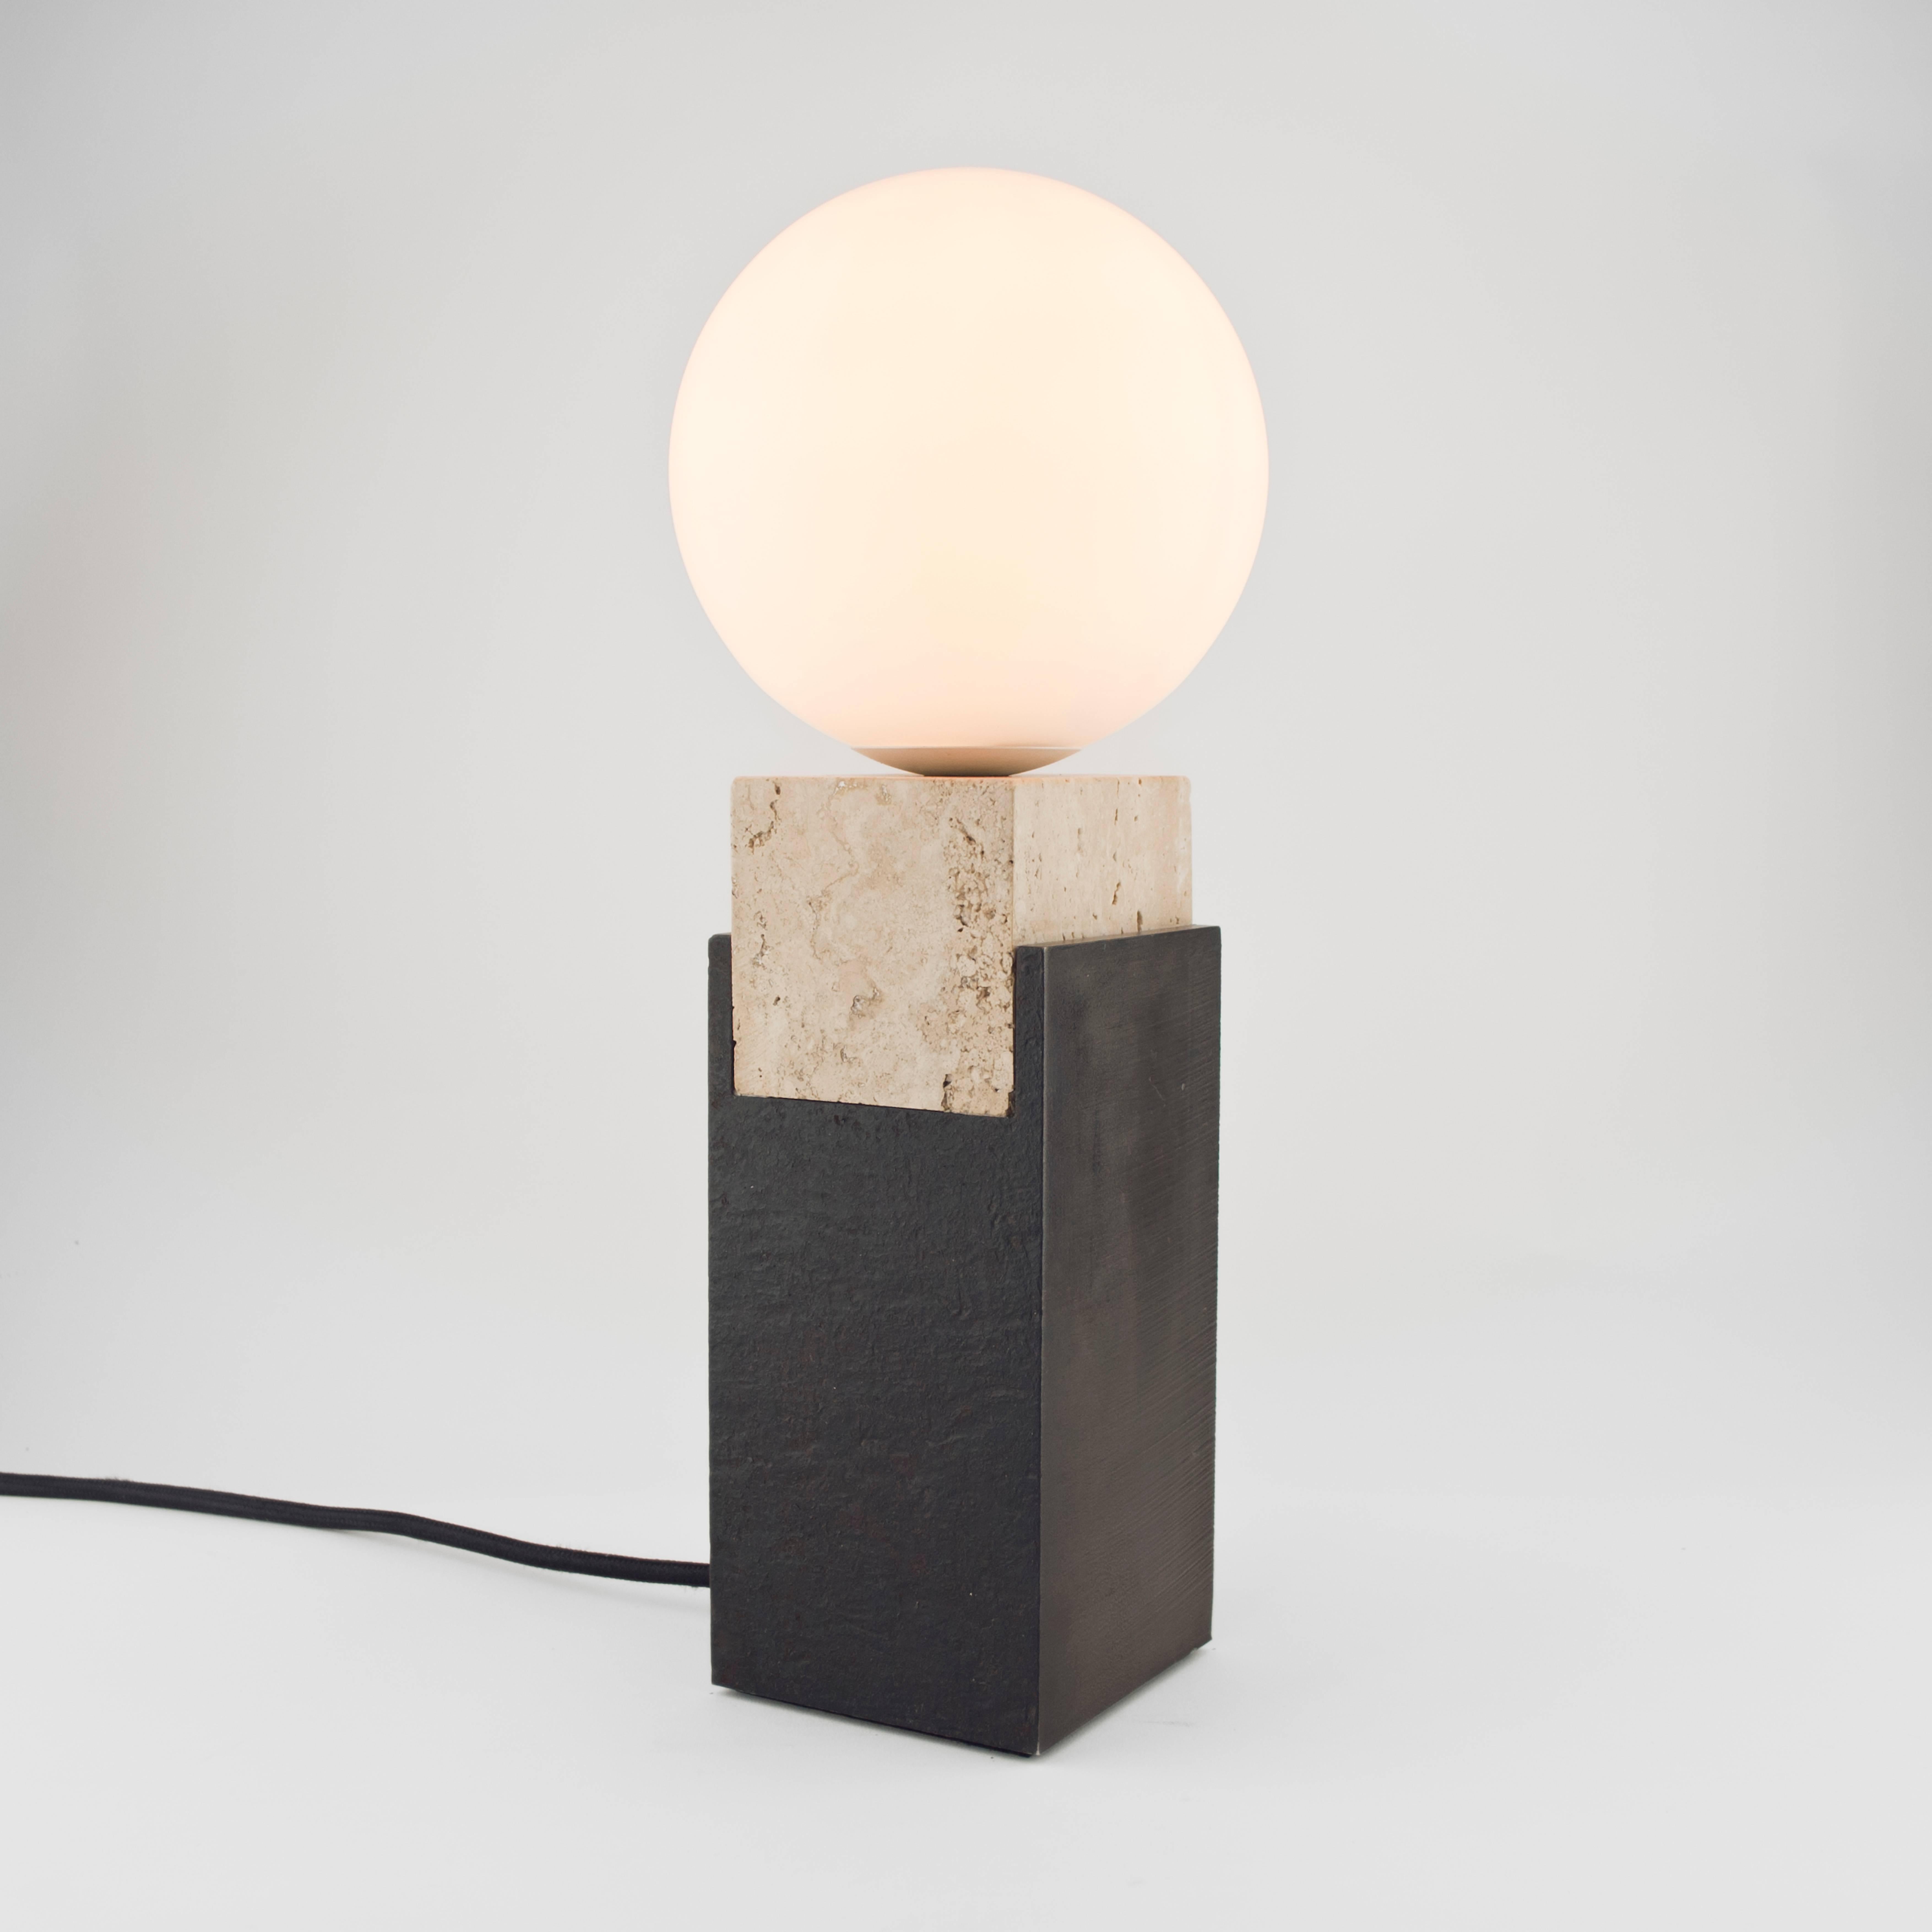 English Contemporary Monument Table Lamp - Square in Travertine, Solid Steel and Glass For Sale